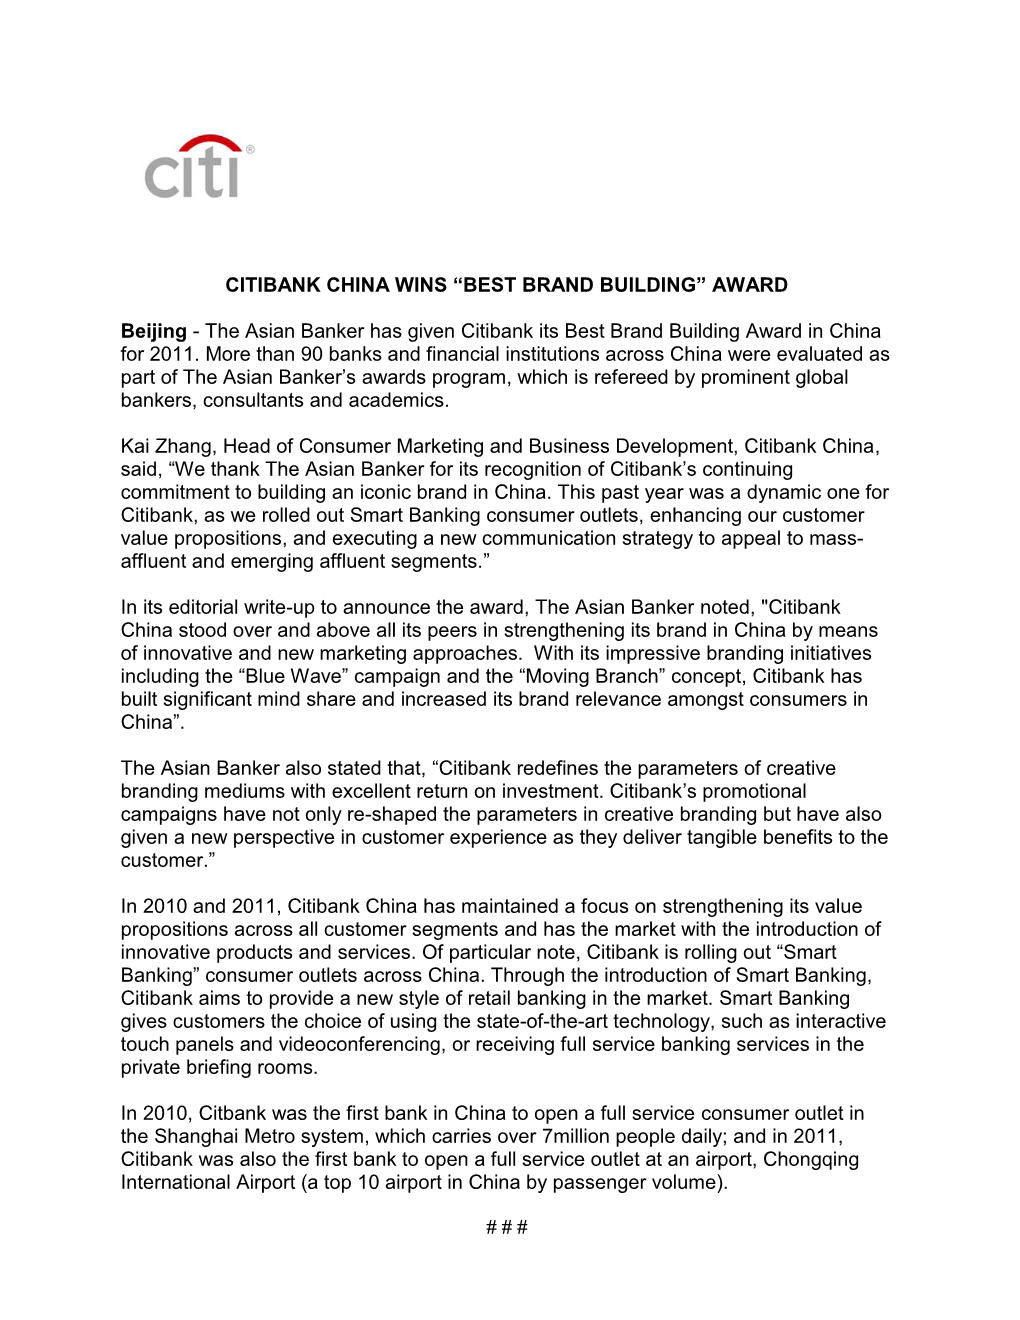 The Asian Banker Has Given Citibank Its Best Brand Building Award in China for 2011